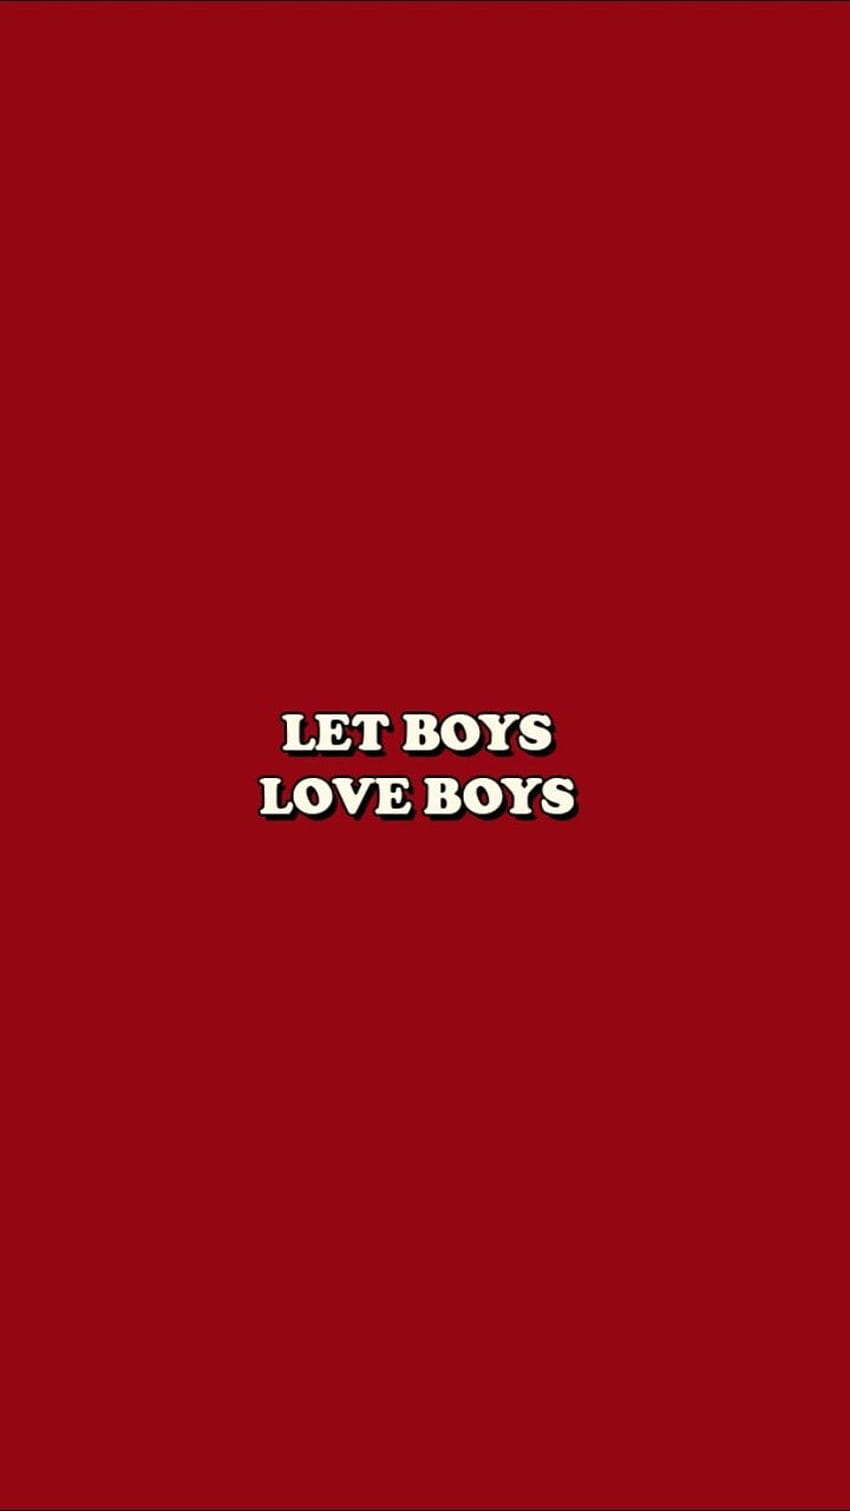 The cover of let boys love - Gay